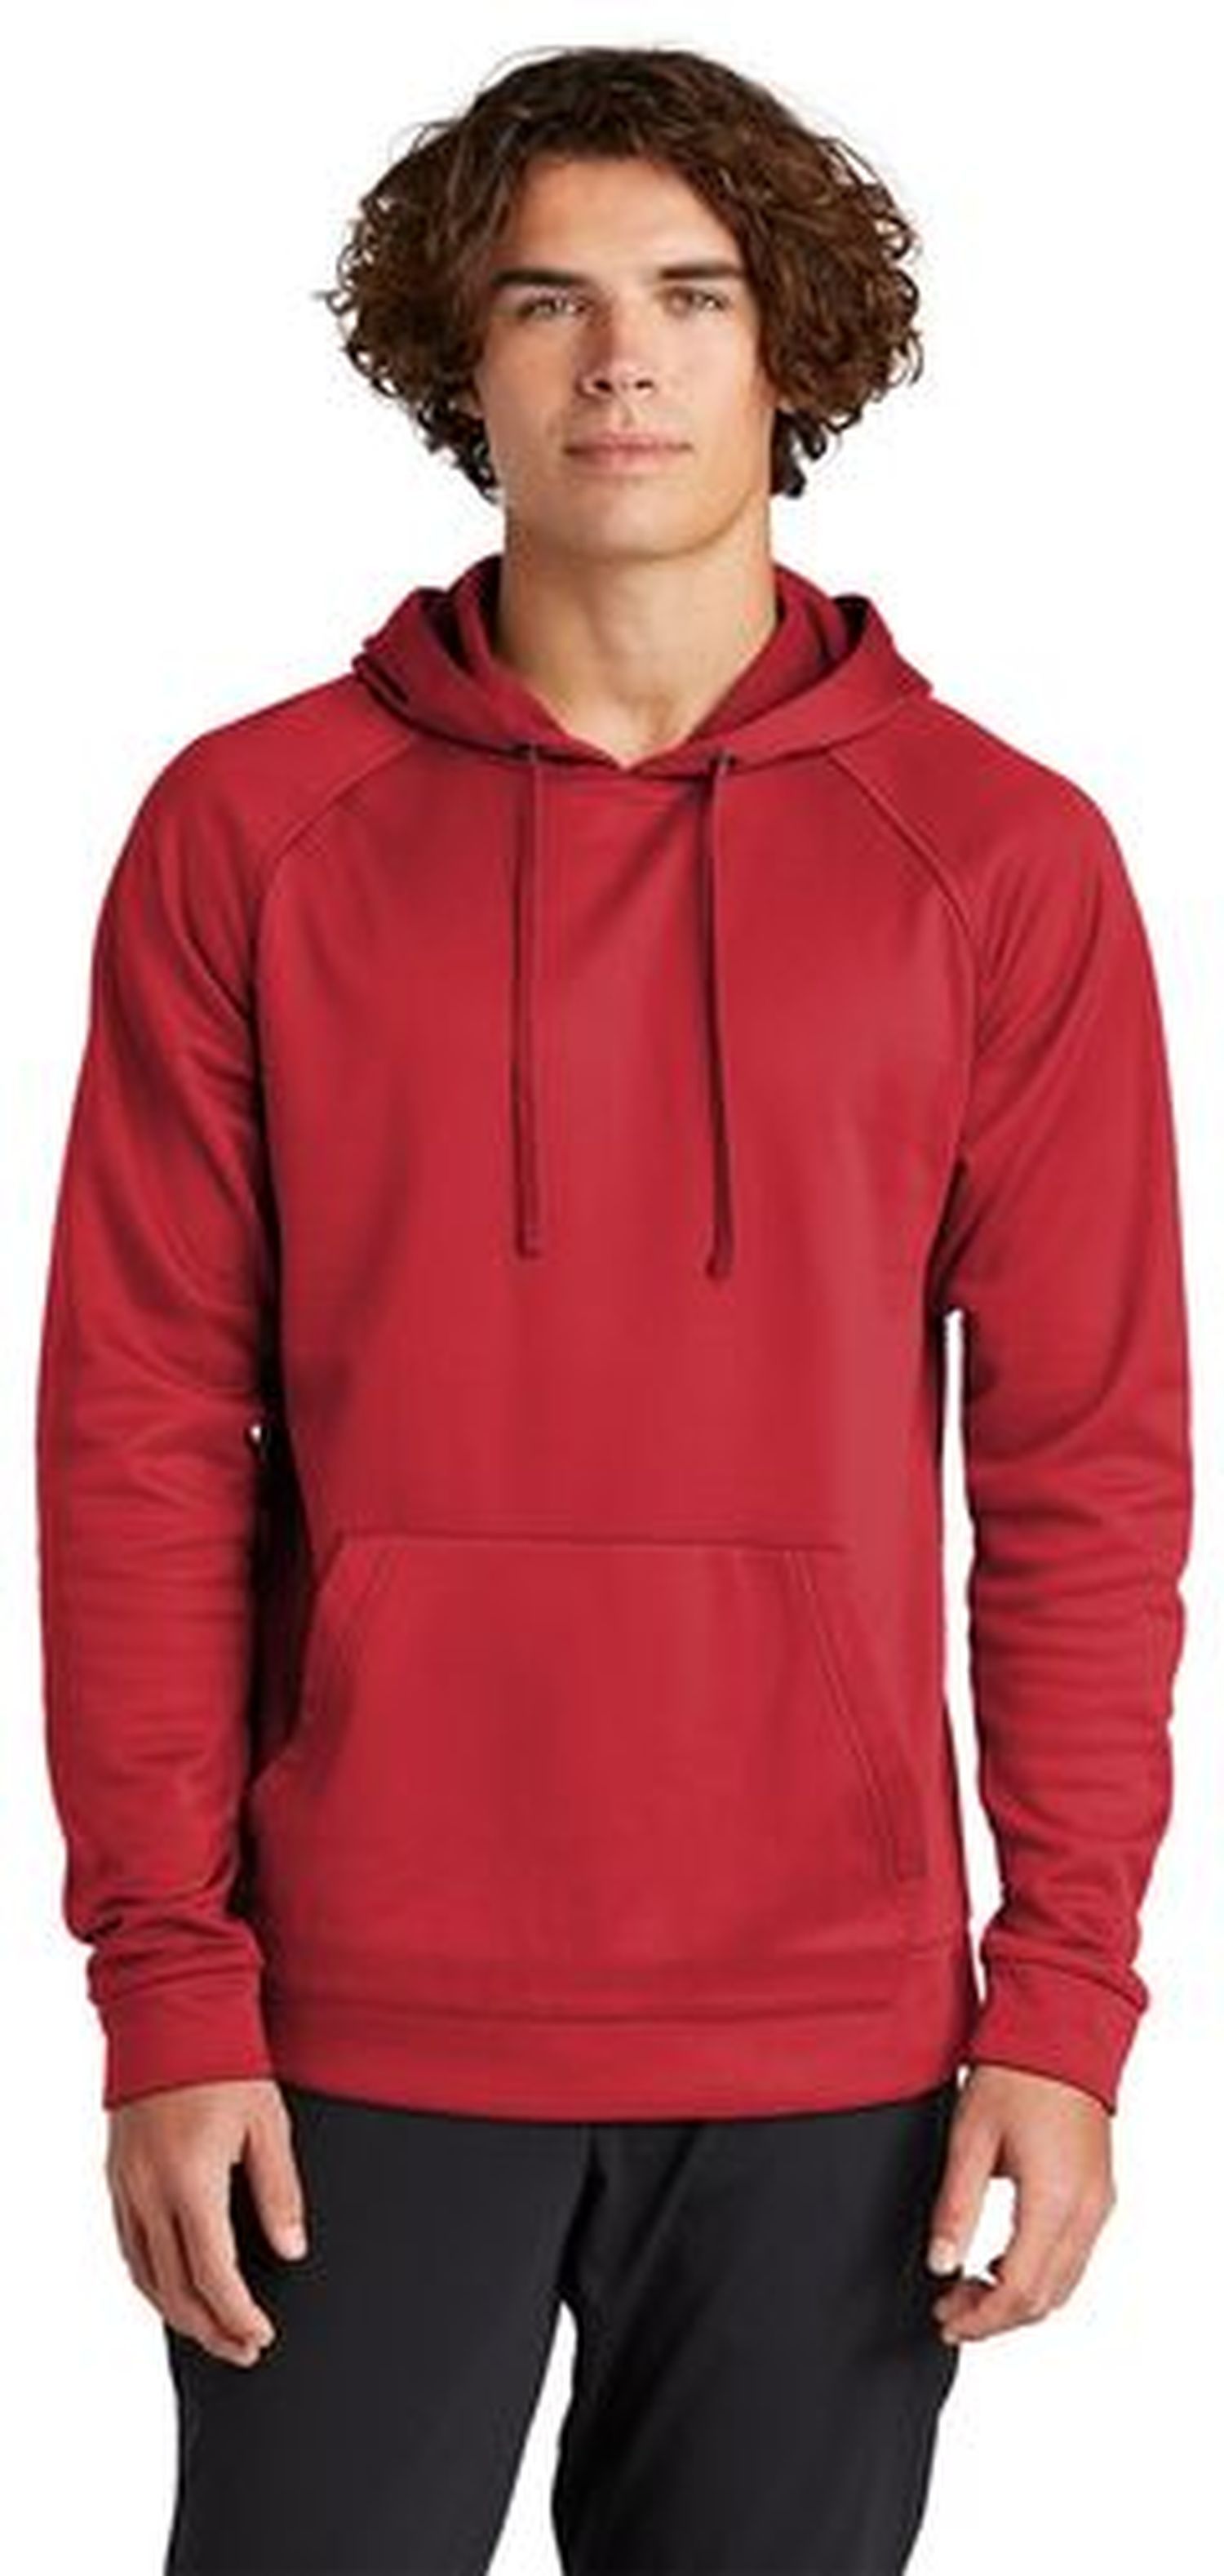 Sport-Tek Adult Unisex 100% Recycled Polyester 5.5-ounce Re-Compete Fleece Pullover Hoody Sweatshirt